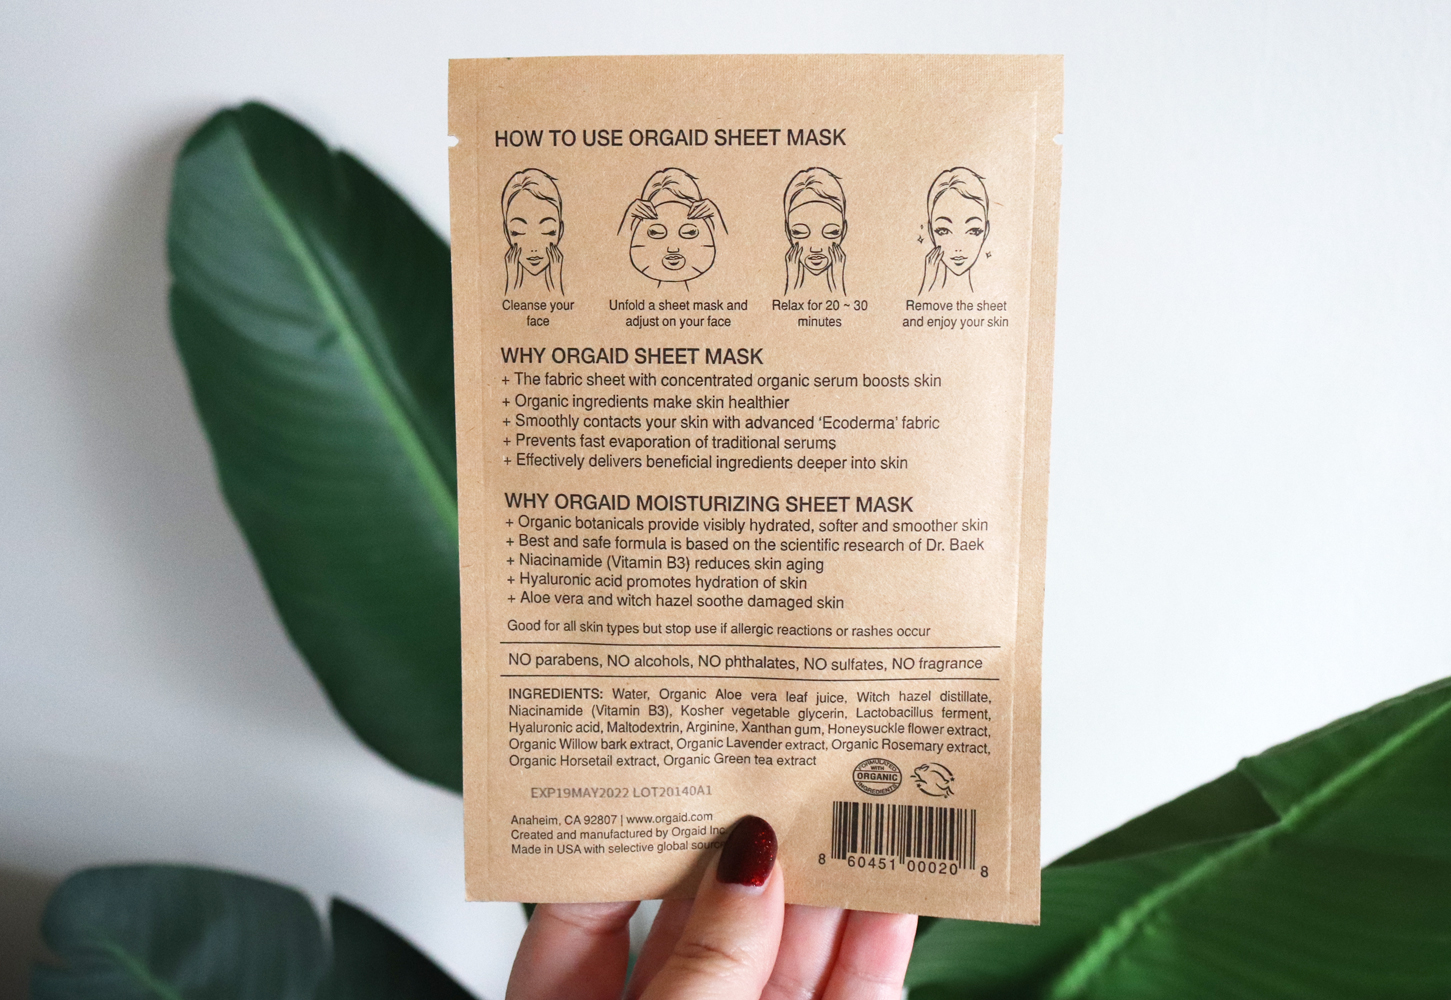 Cruelty free beauty from Cynaglow - ORGAID organic sheet mask review